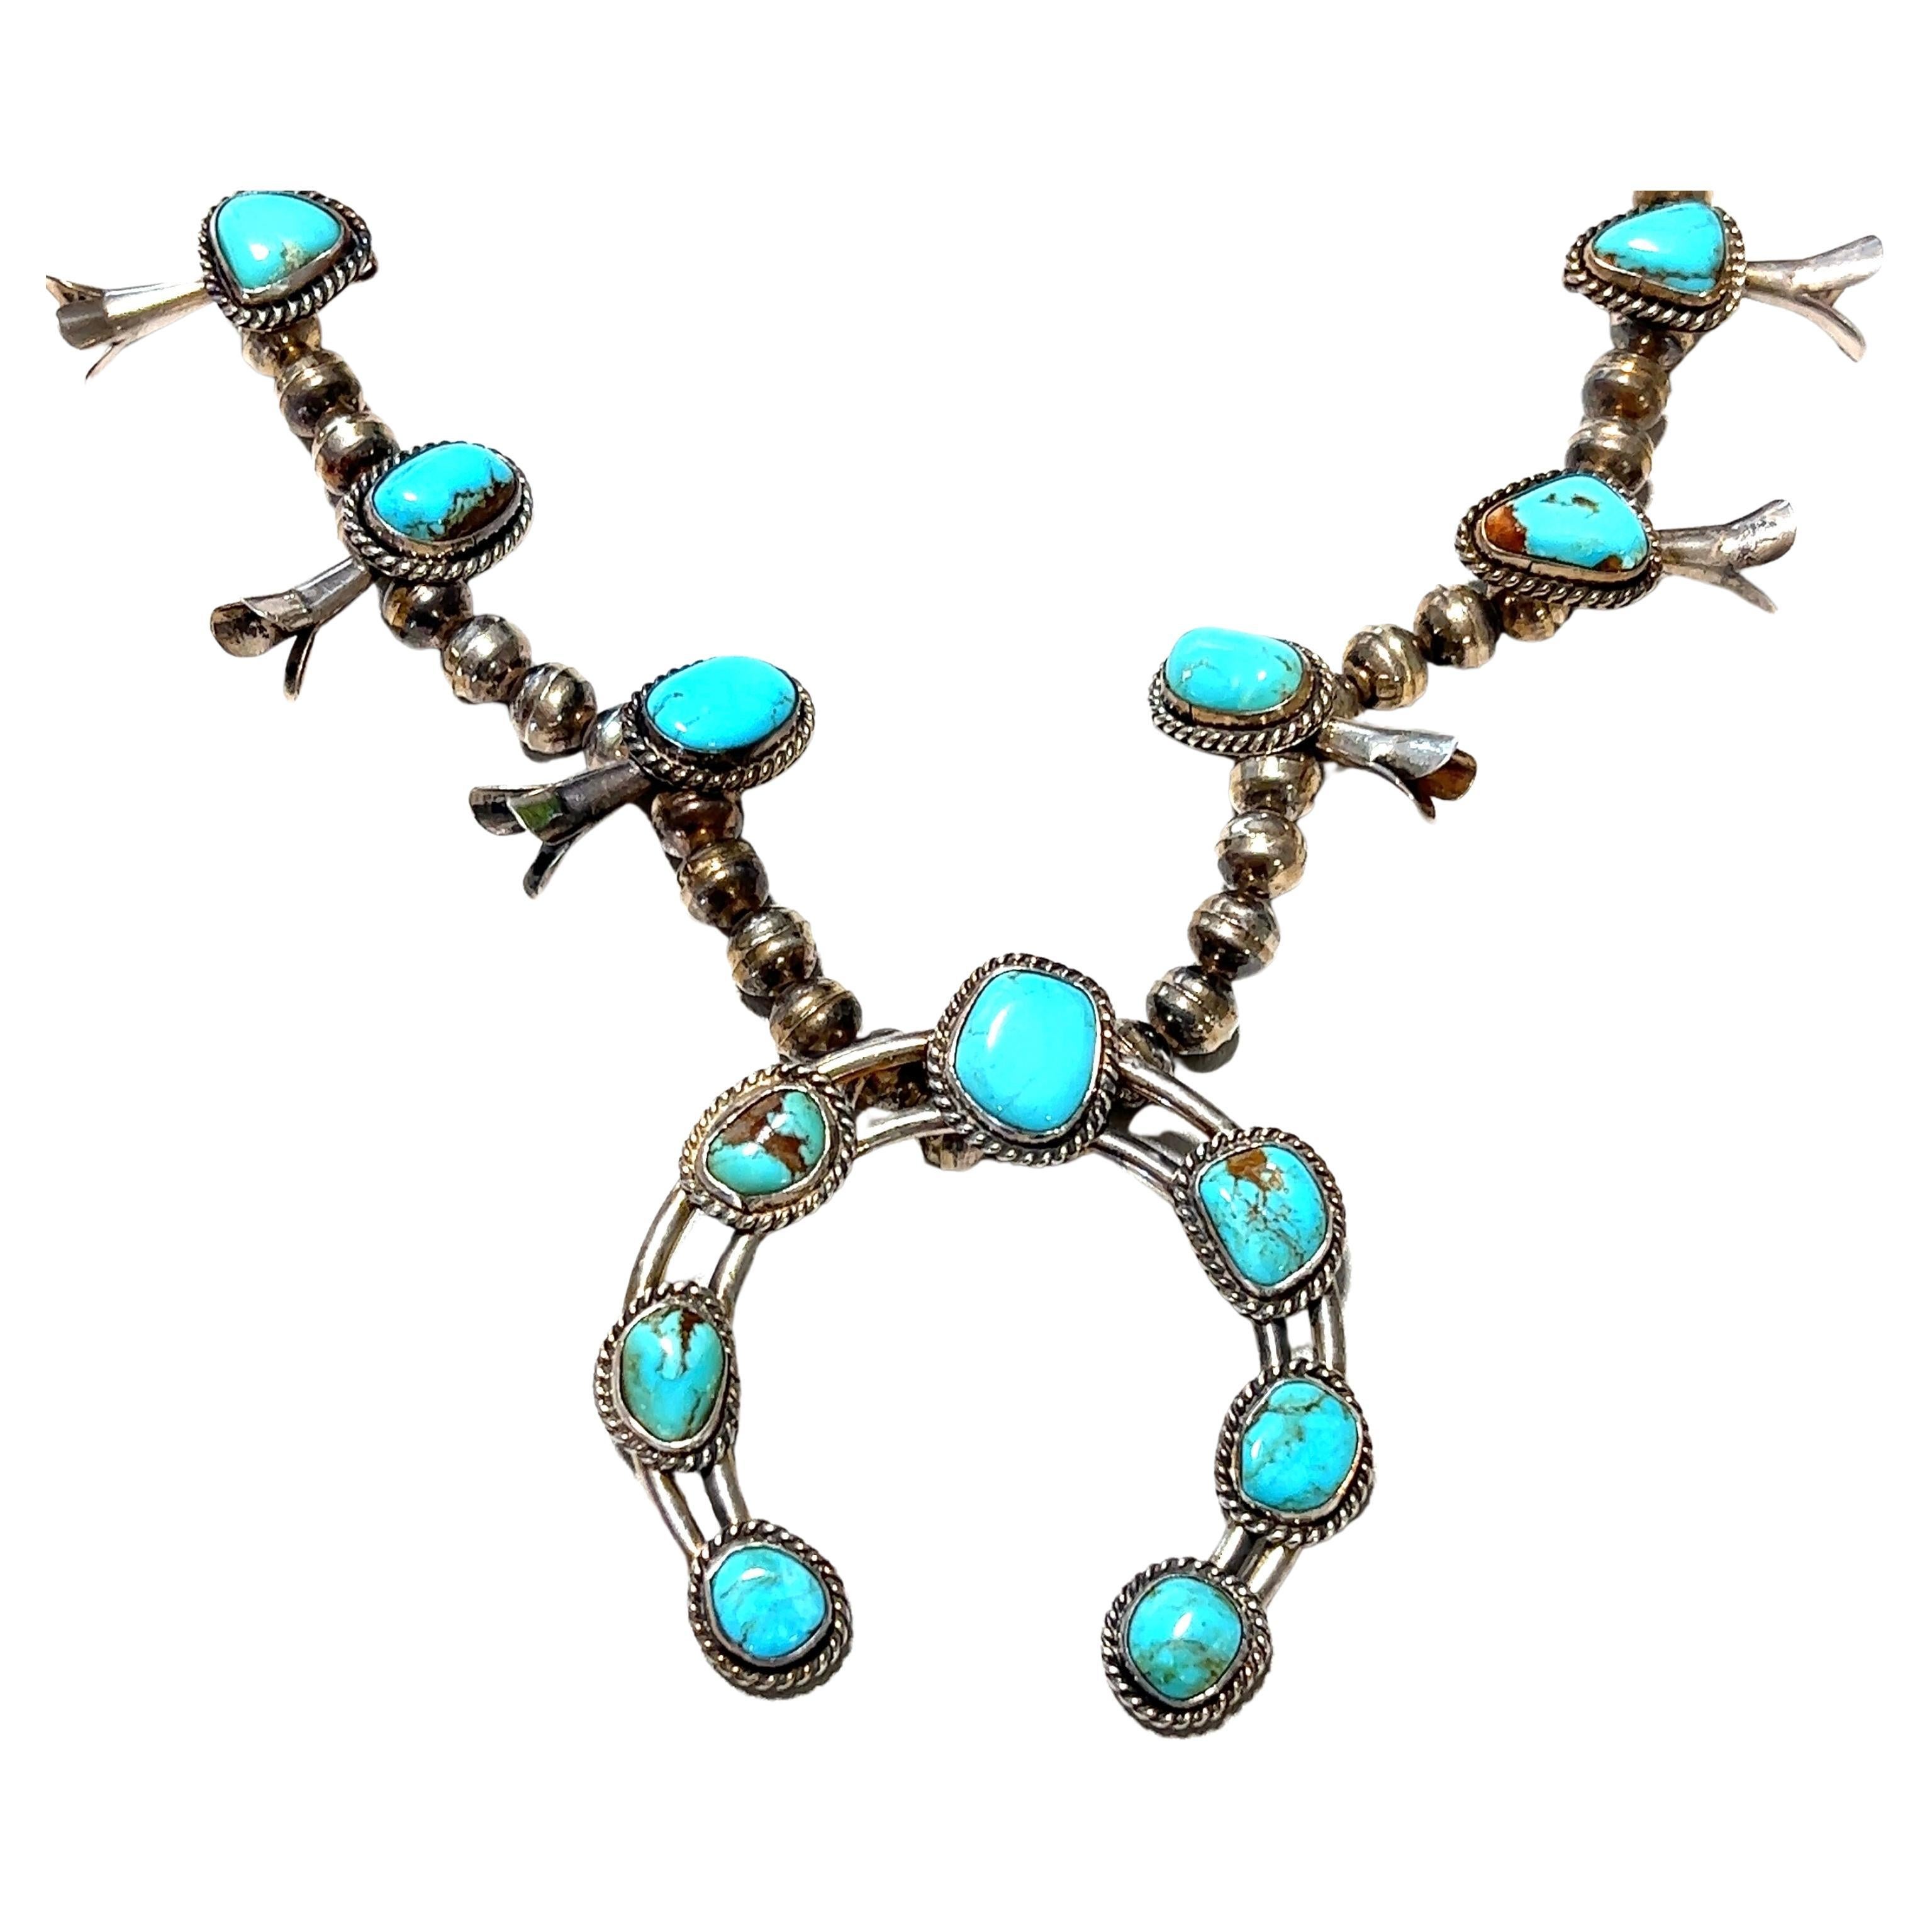 Native American Sterling Silver Genuine Turquoise Navajo Squash Blossom Necklace